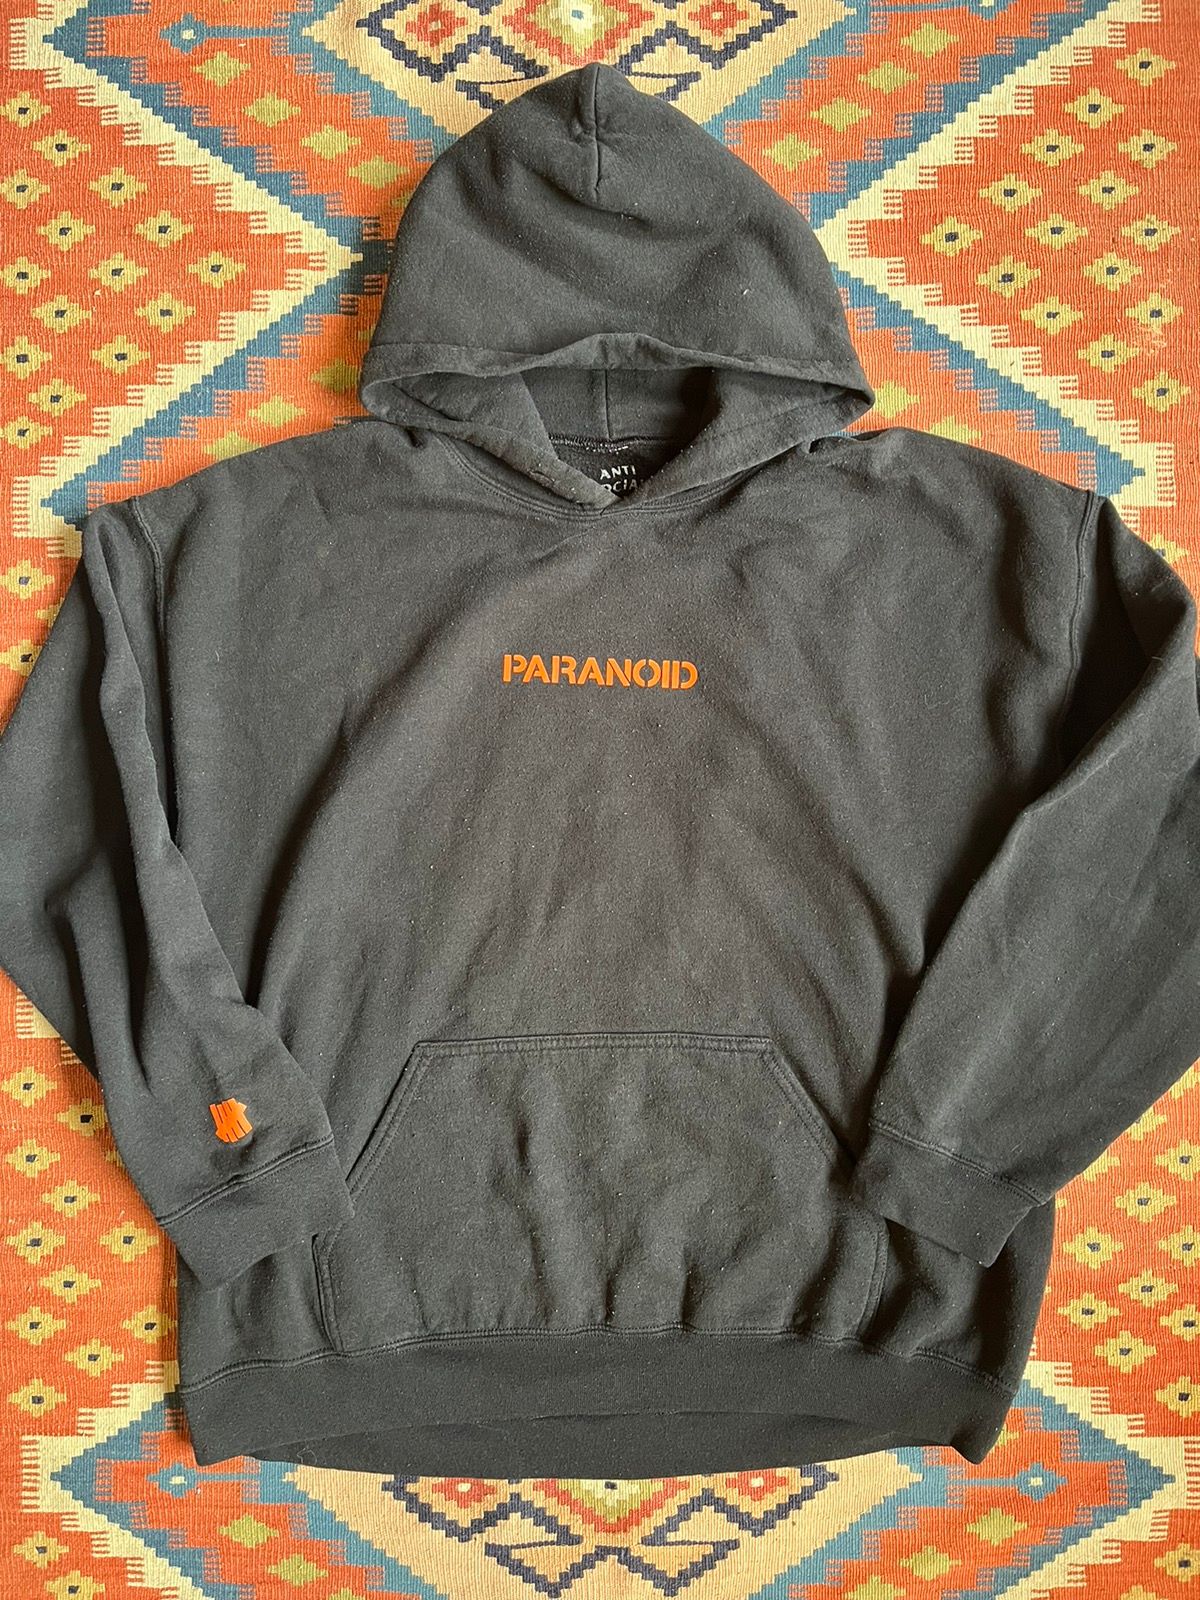 Undefeated Anti Social Social Club Undefeated Paranoid Hoodie